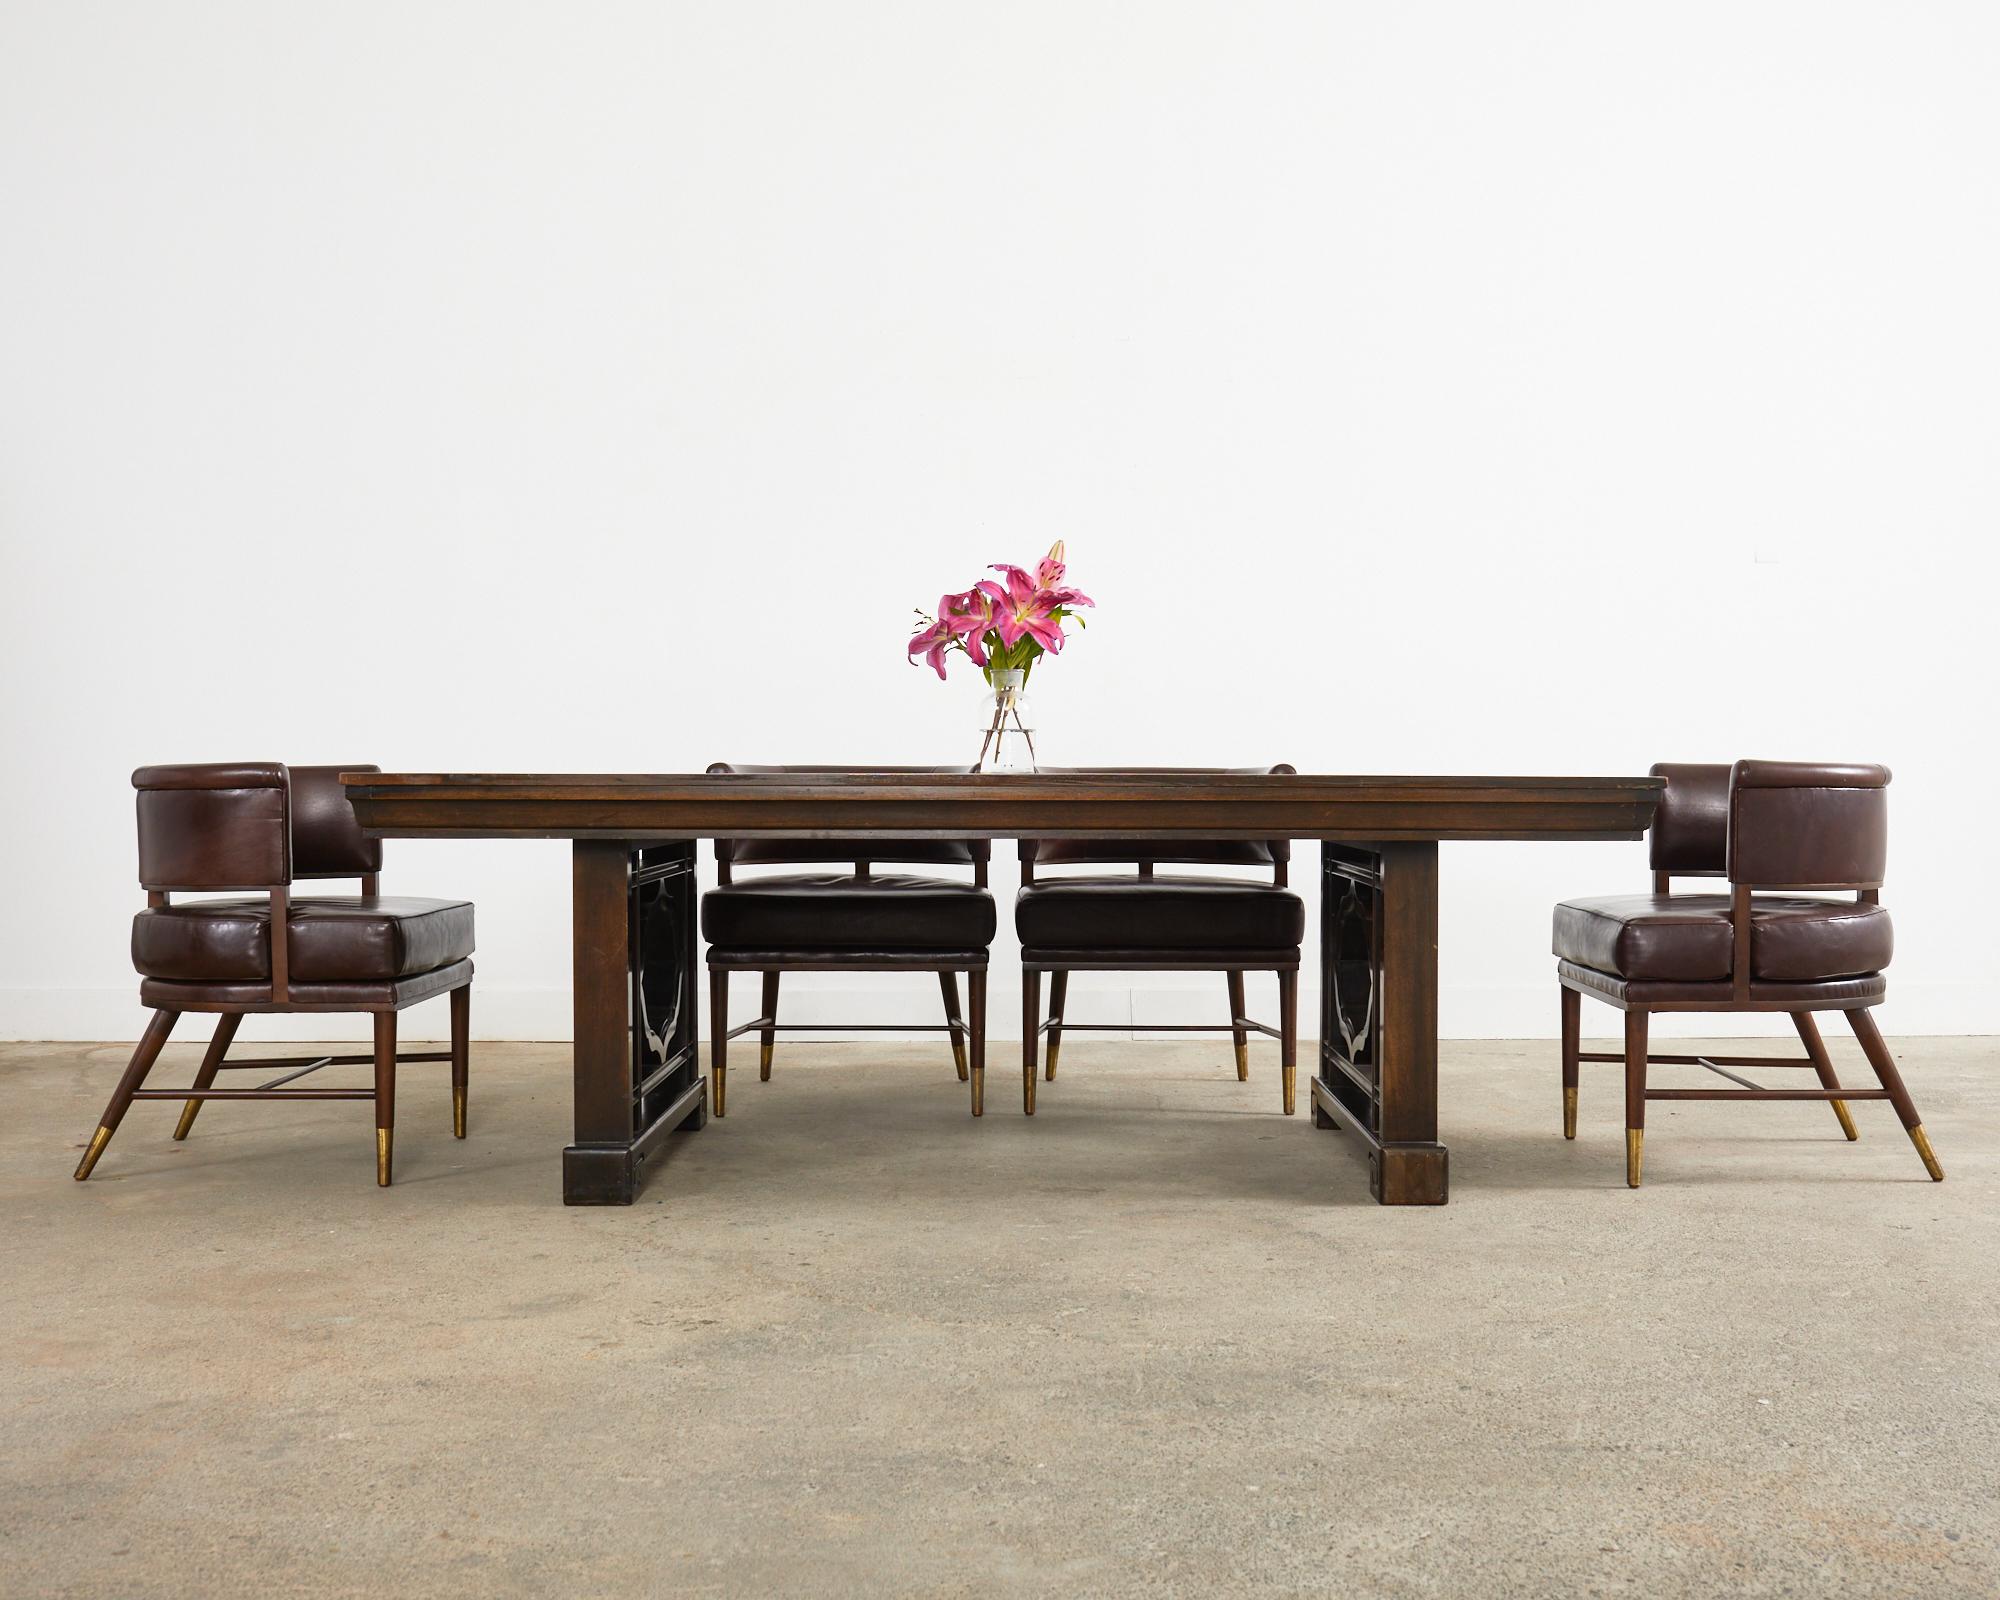 Grand mid-century modern mahogany dining table with two extending leaves measuring 24 inches each. Rare table produced by John Widdicomb with its Asian inspired design attributed to T.H Robsjohn Gibbings. The table top measures 88 inches closed and